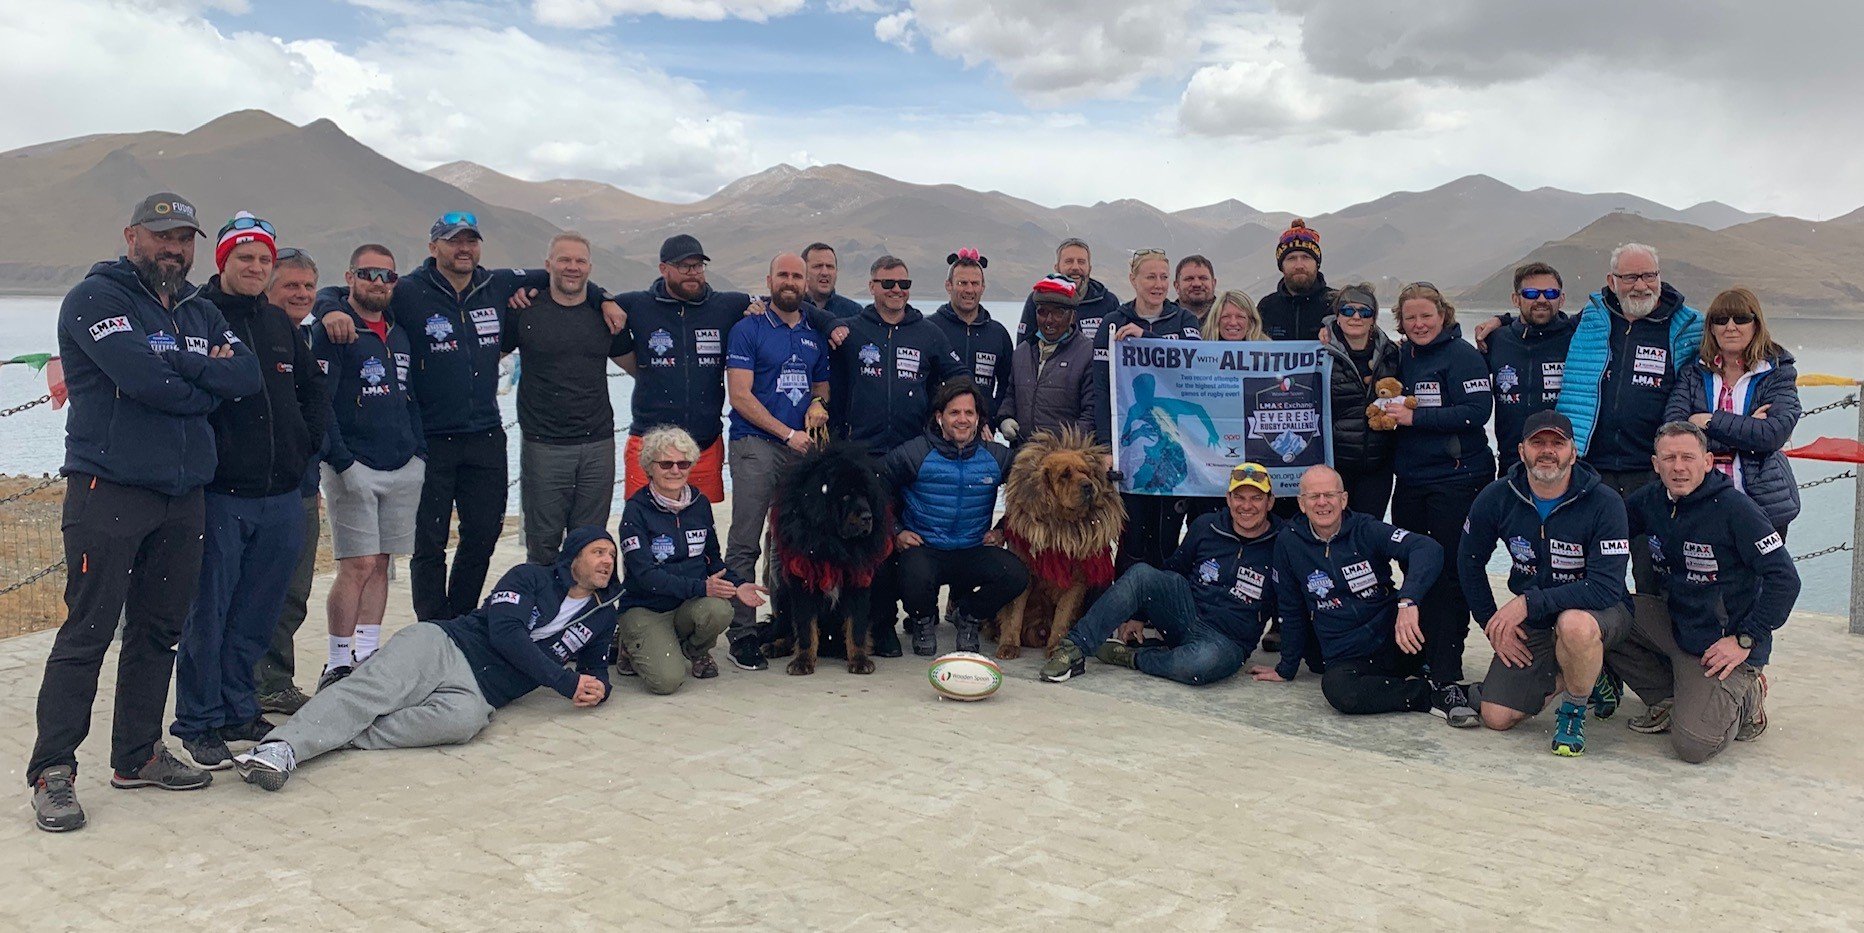 LMAX Rugby Challenge rugby team is posing in a group photo in Tibetan plateau and highlands.